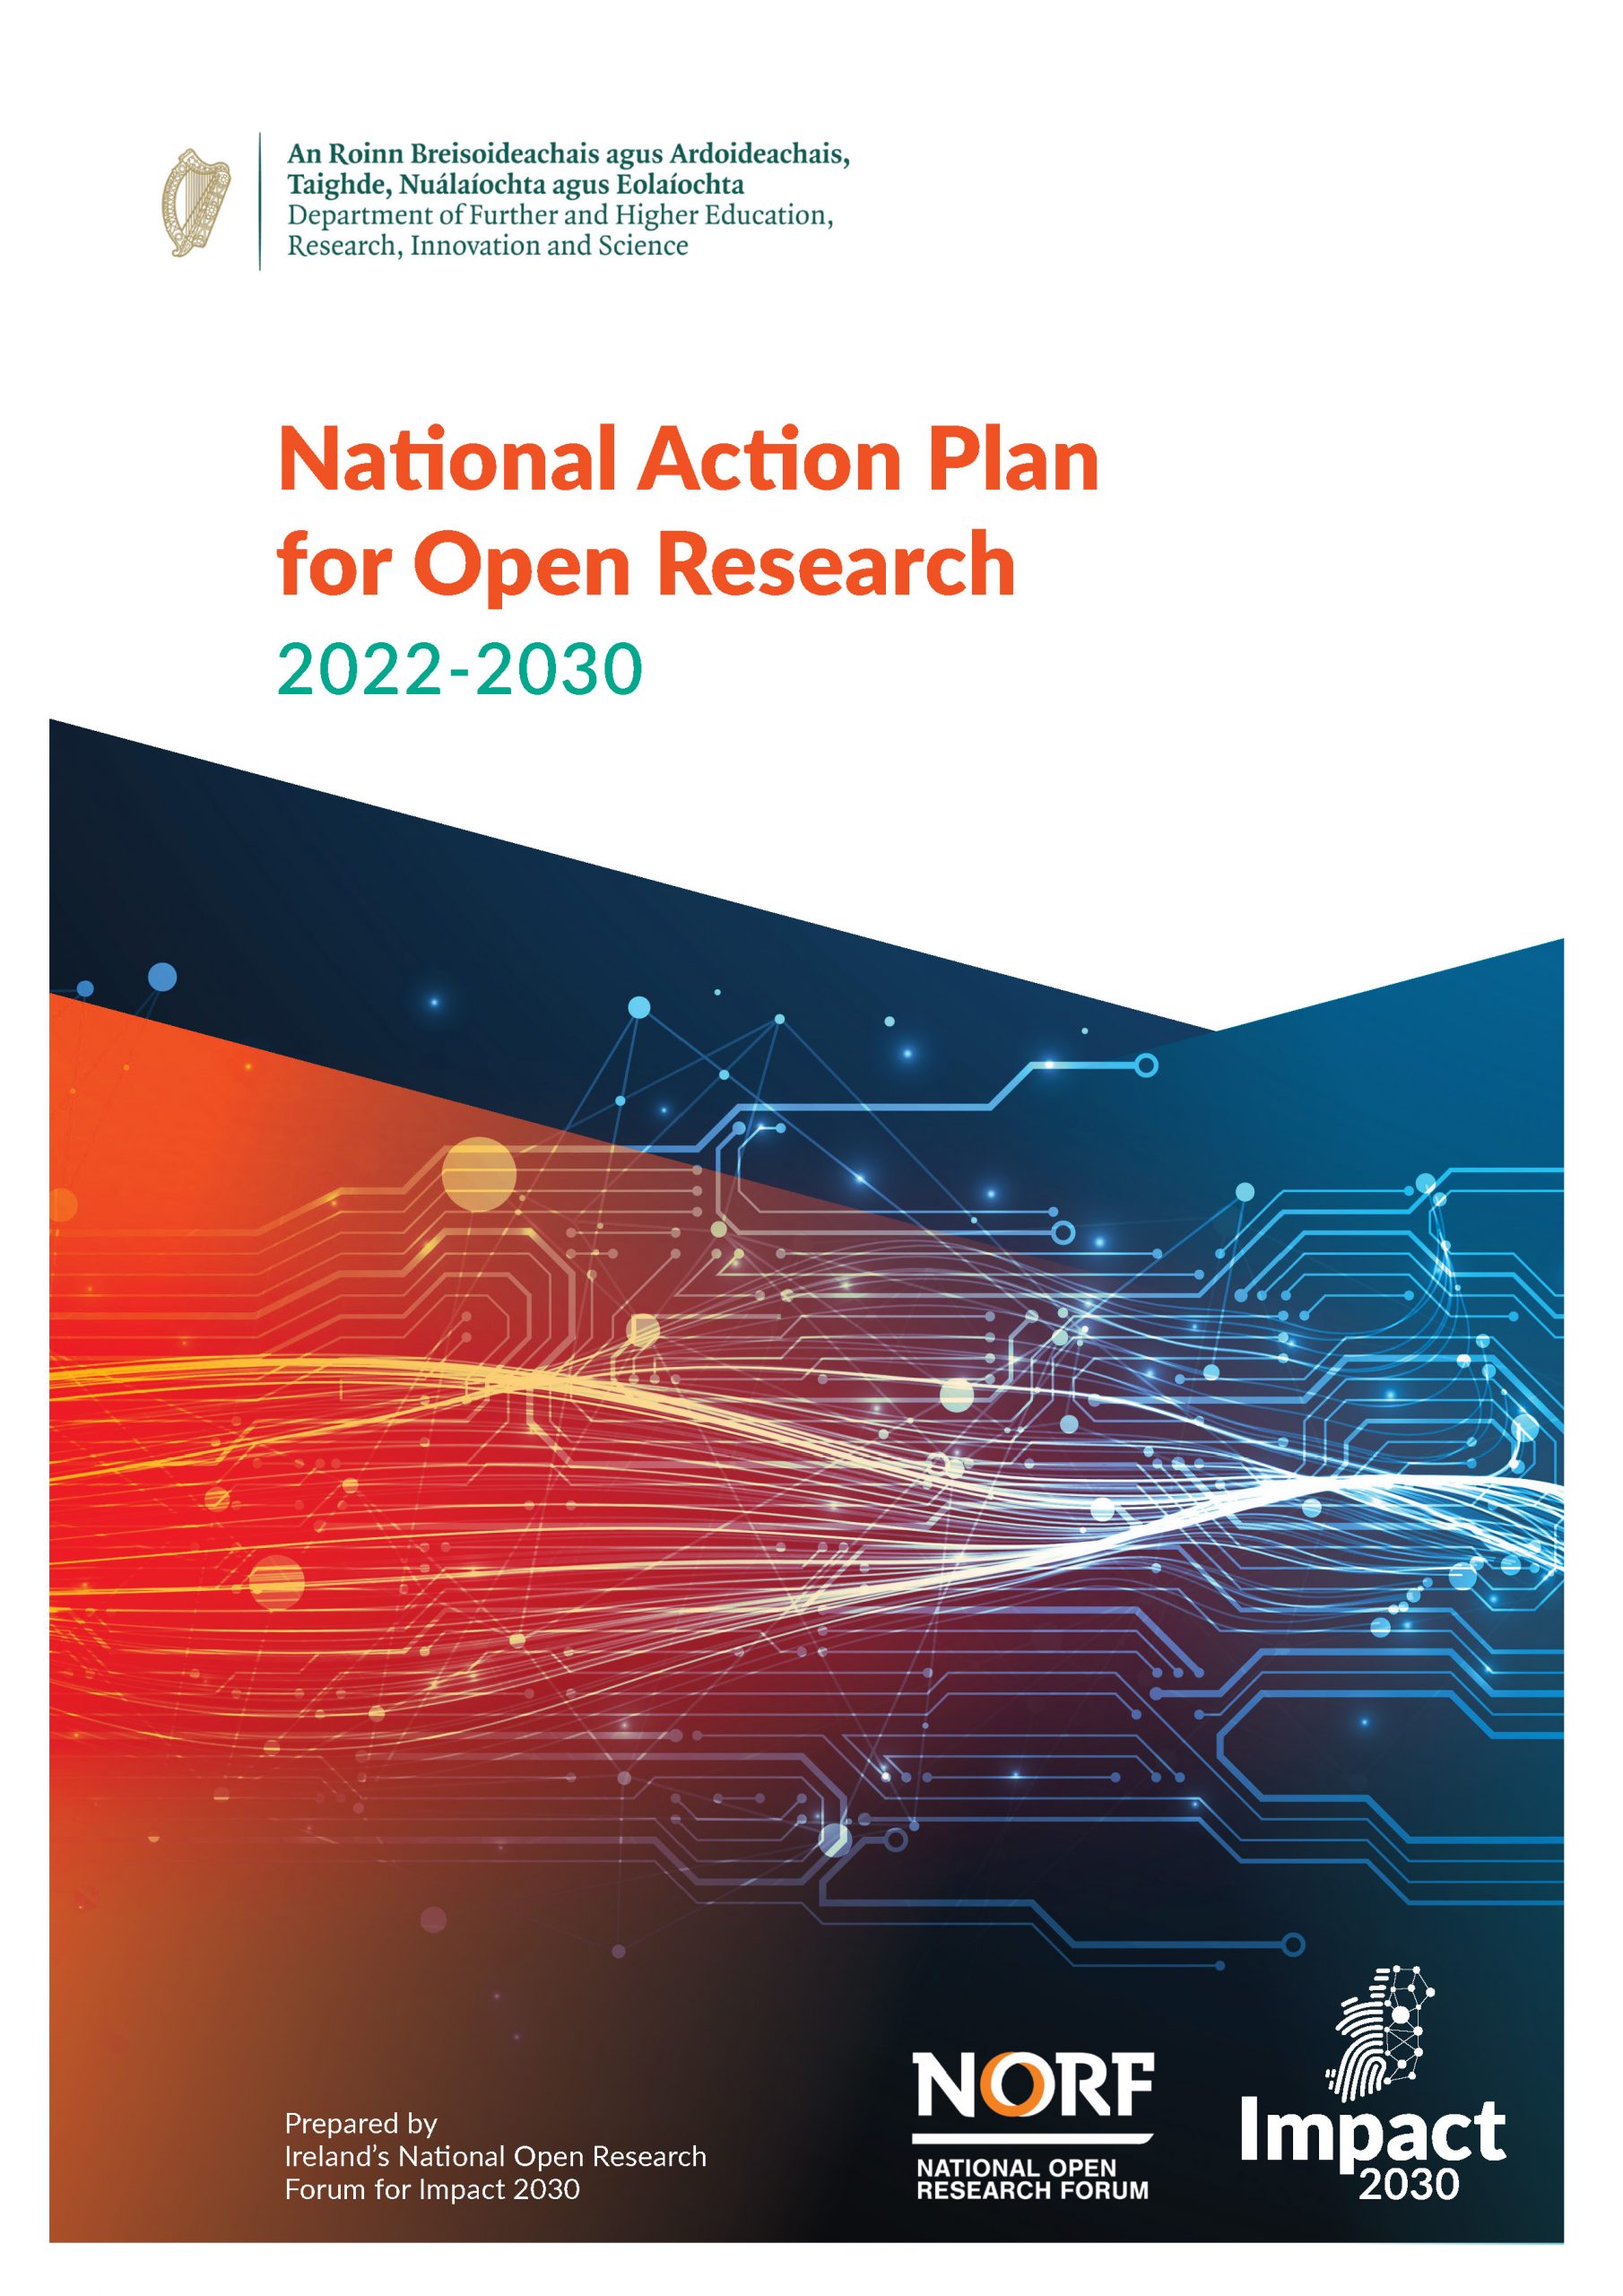 NORF national action plan